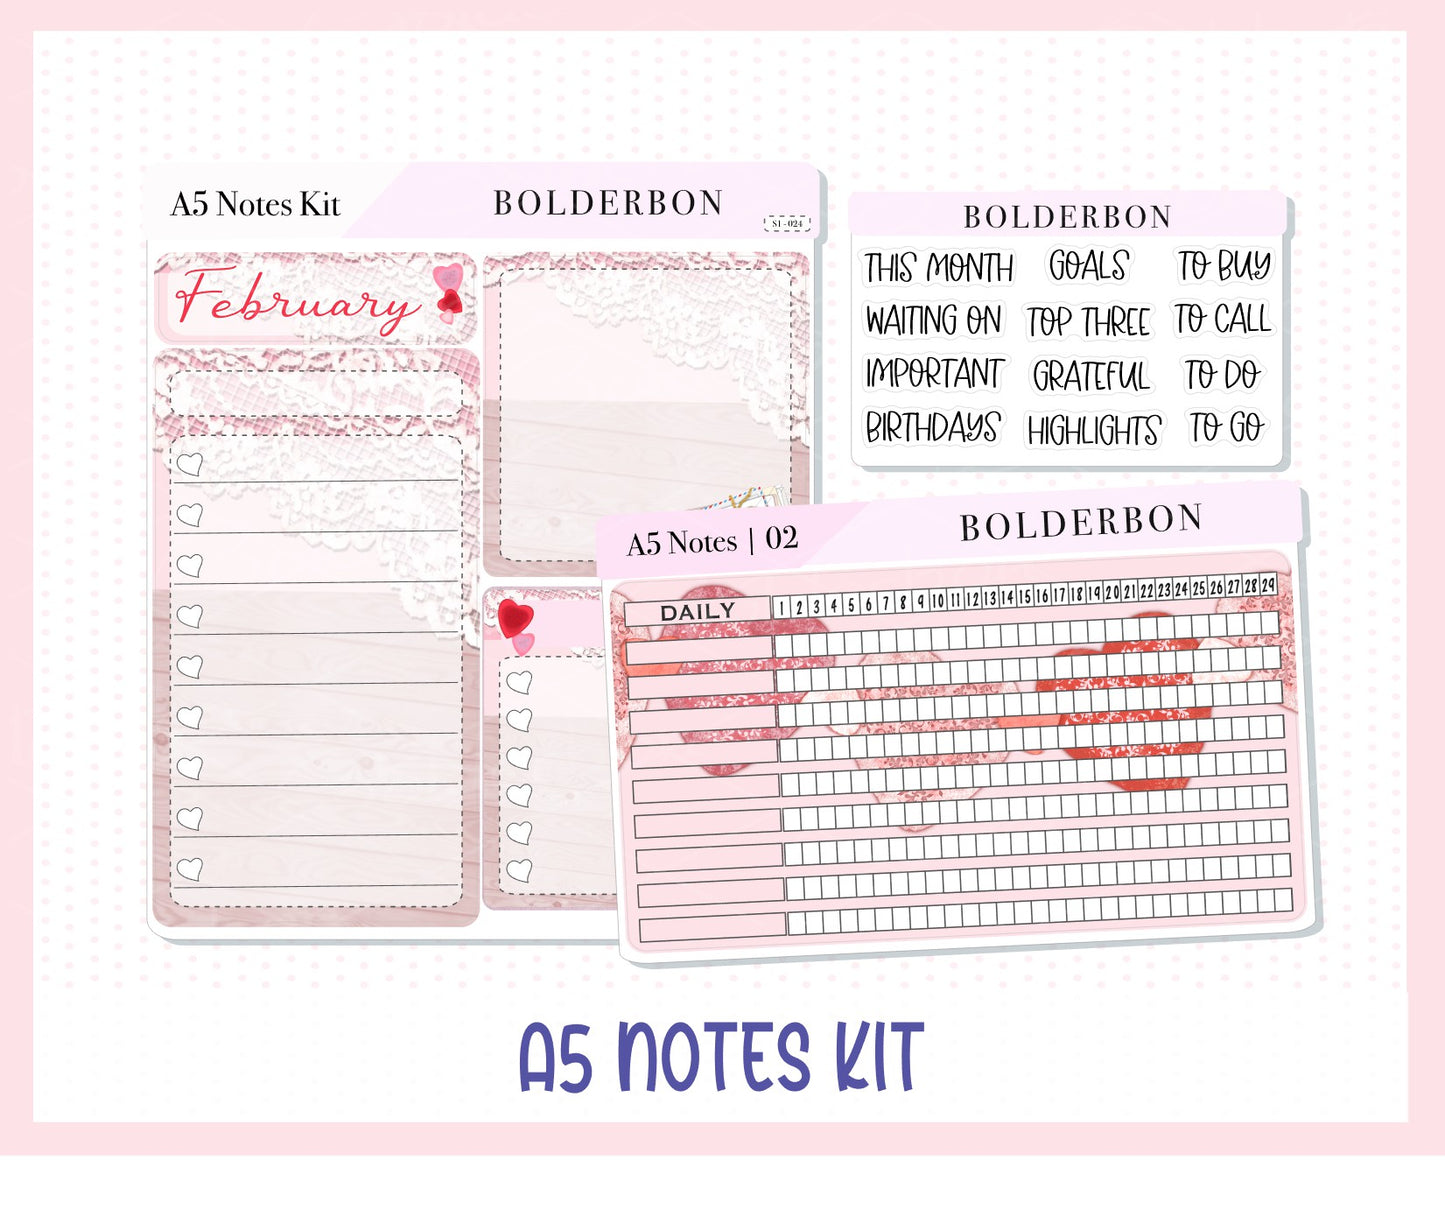 FEBRUARY - A5 NOTES KIT || Compact Vertical, A5 Daily Duo, A5 Horizontal, Planner Stickers